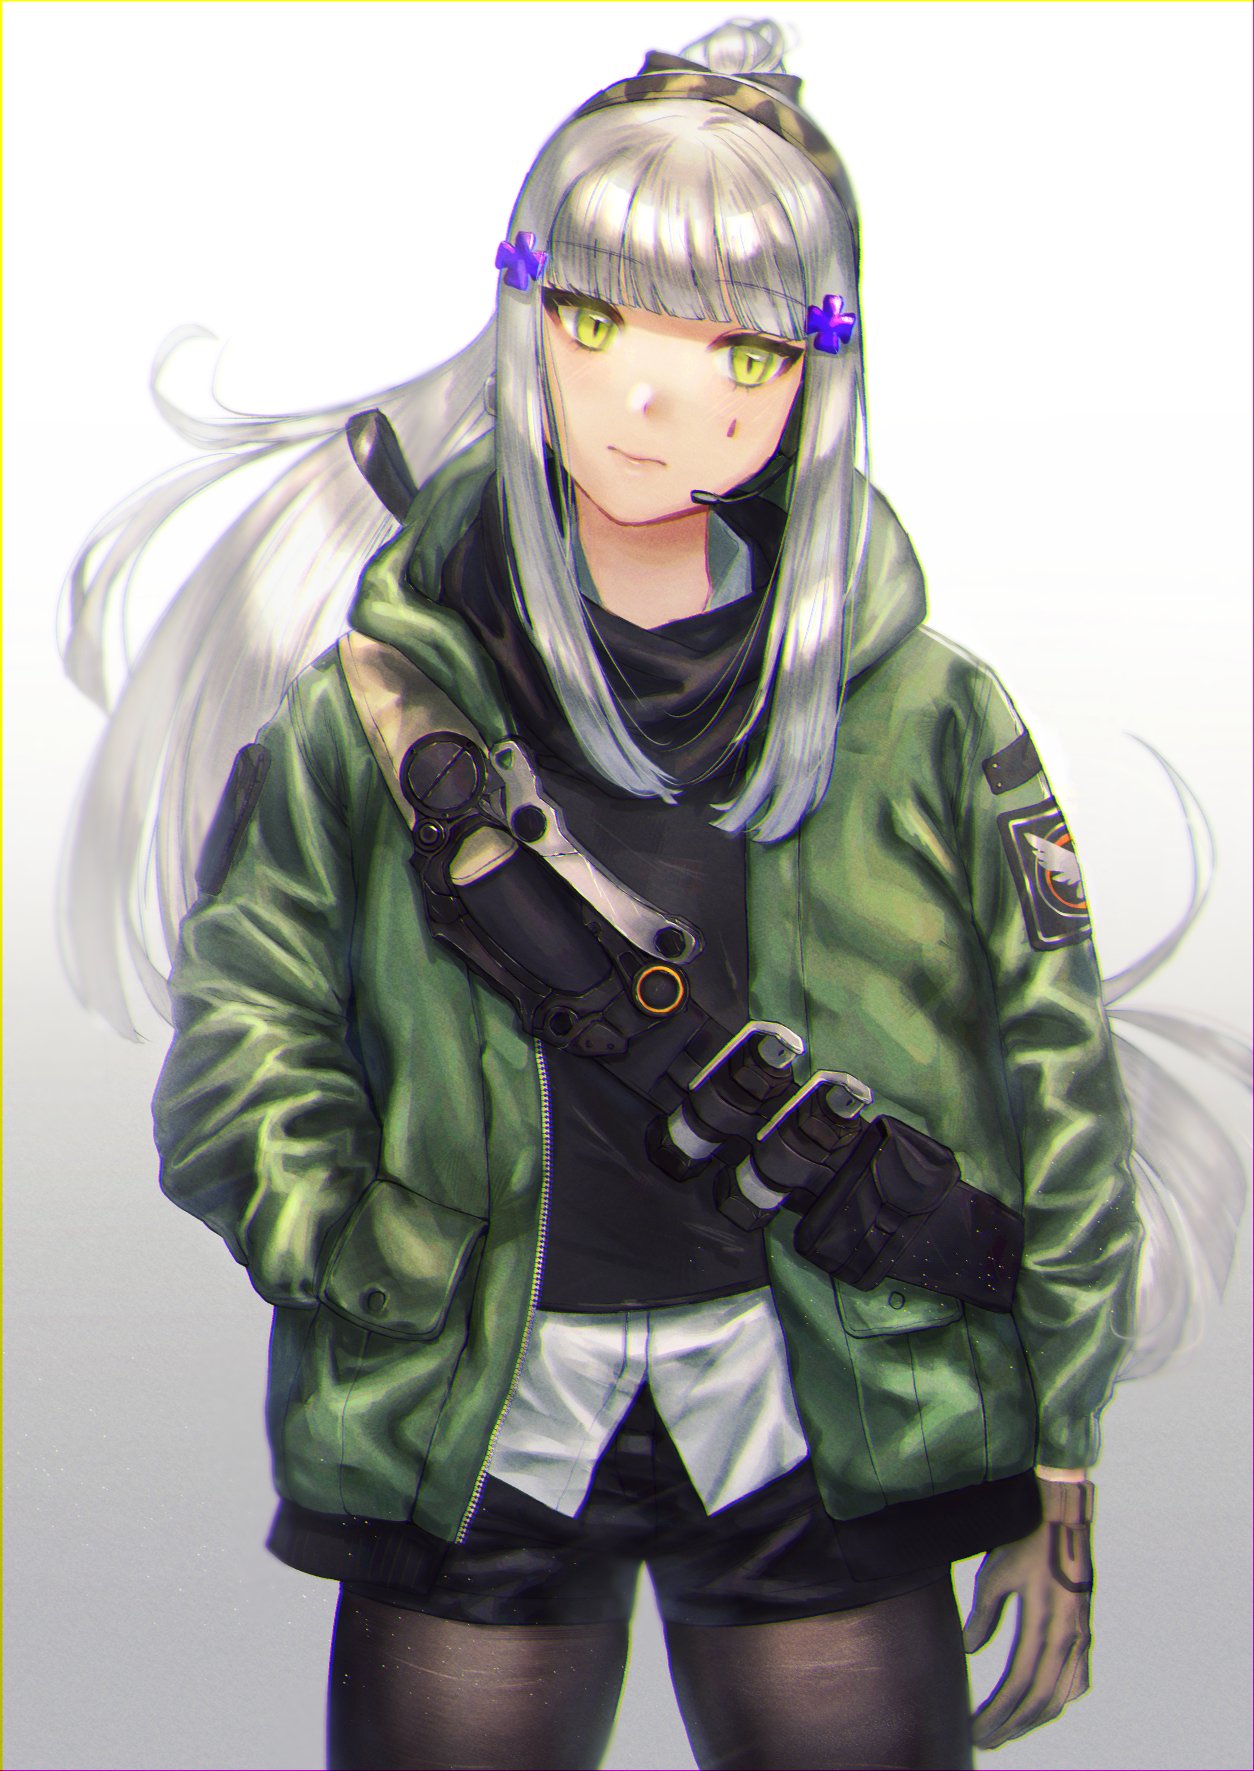 1girl agent_416_(girls_frontline) bandolier crossover explosive eyebrows_visible_through_hair girls_frontline green_eyes grenade hand_in_pocket headphones headset highres hk416_(girls_frontline) jacket long_hair pantyhose shorts silver_hair smoke_grenade solo tactical_clothes tom_clancy's_the_division xanax025